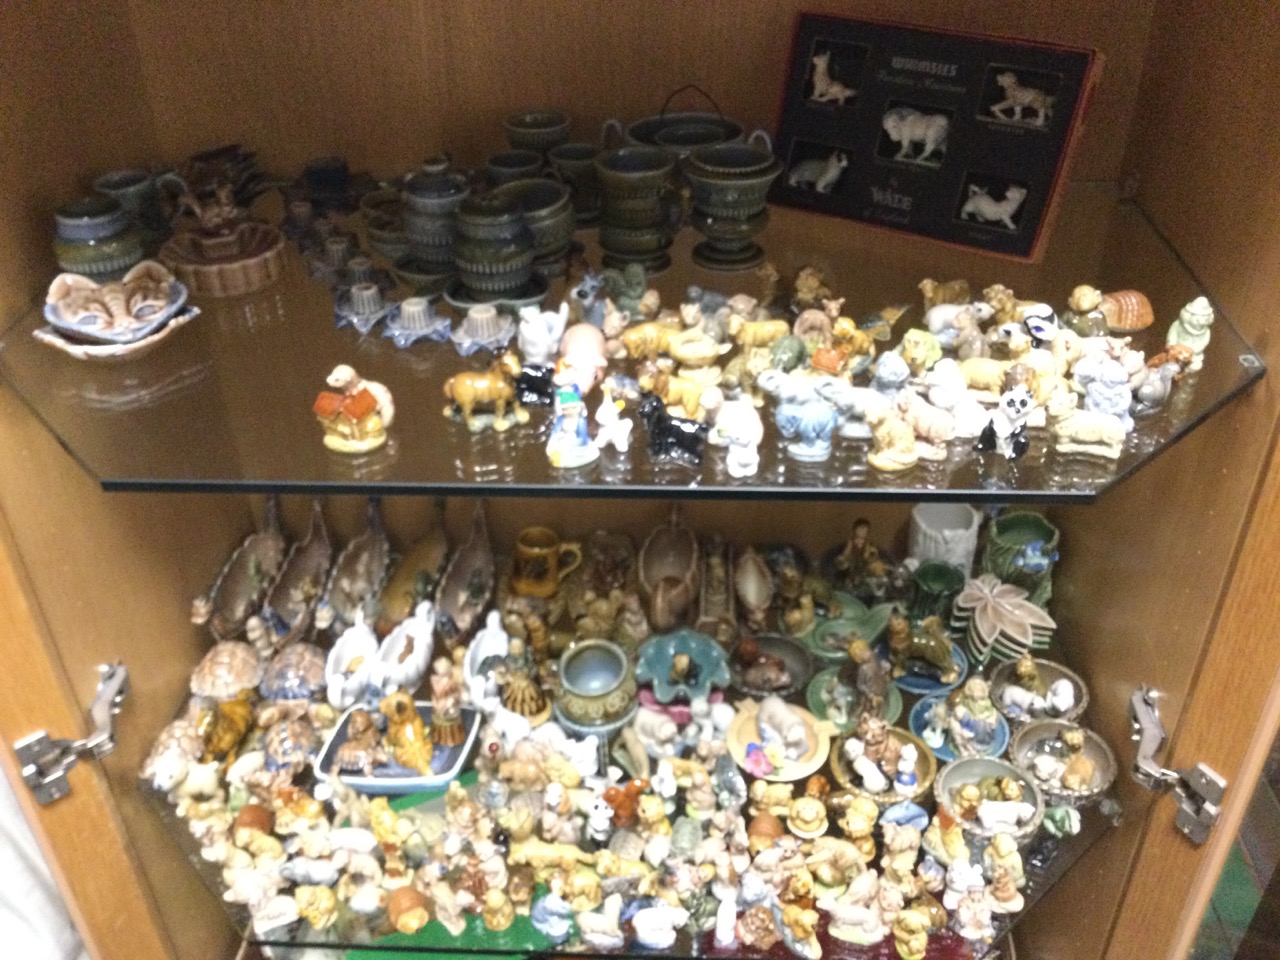 A large collection of Wade whimsies - animals, figures, Viking boats, tortoises, bowls, pots,